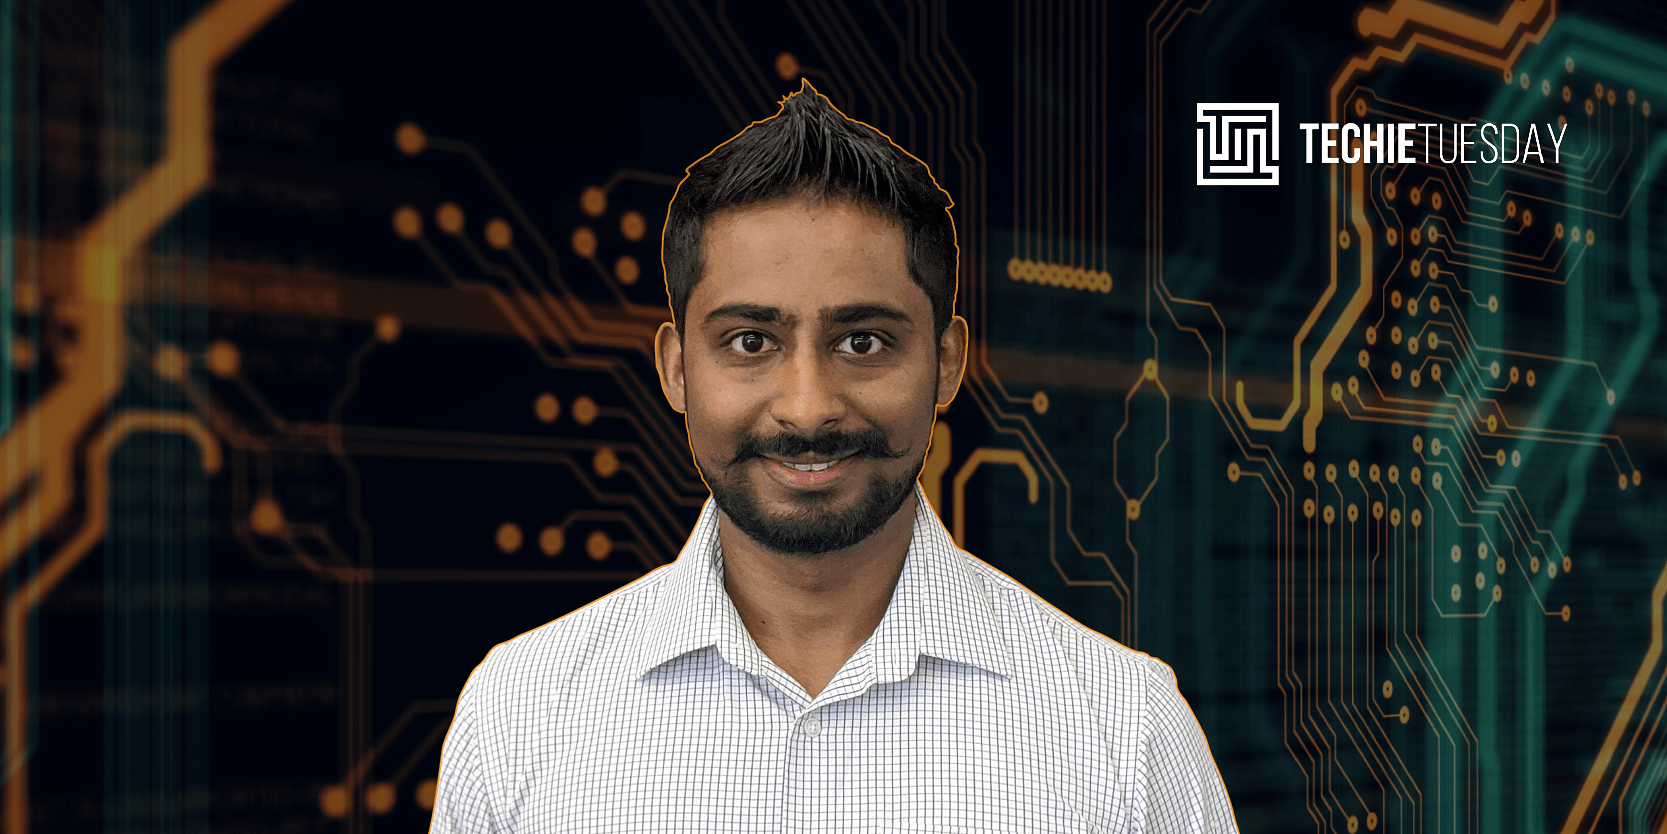 You are currently viewing [Techie Tuesday] Meet Saiman Shetty, who went from a small town near Udupi to building powertrain systems at T